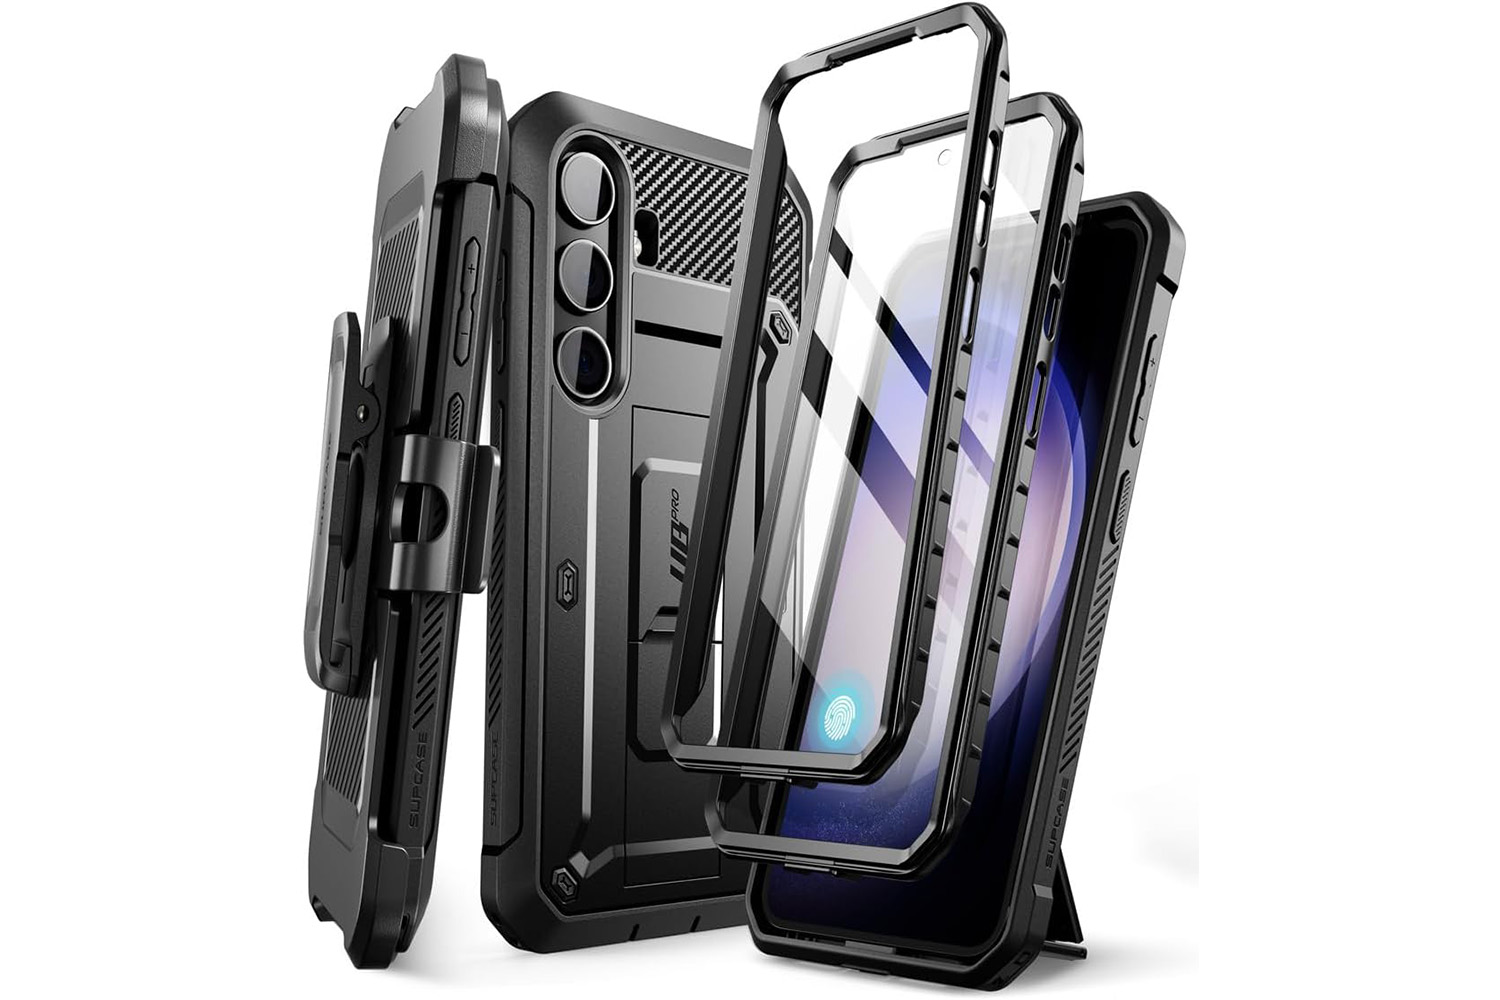  SPIDERCASE Designed for Samsung Galaxy S24 Plus Case, [10 FT  Military Grade Drop Protection] Heavy Duty Shockproof Phone Case for Galaxy  S24 Plus, Black : Cell Phones & Accessories